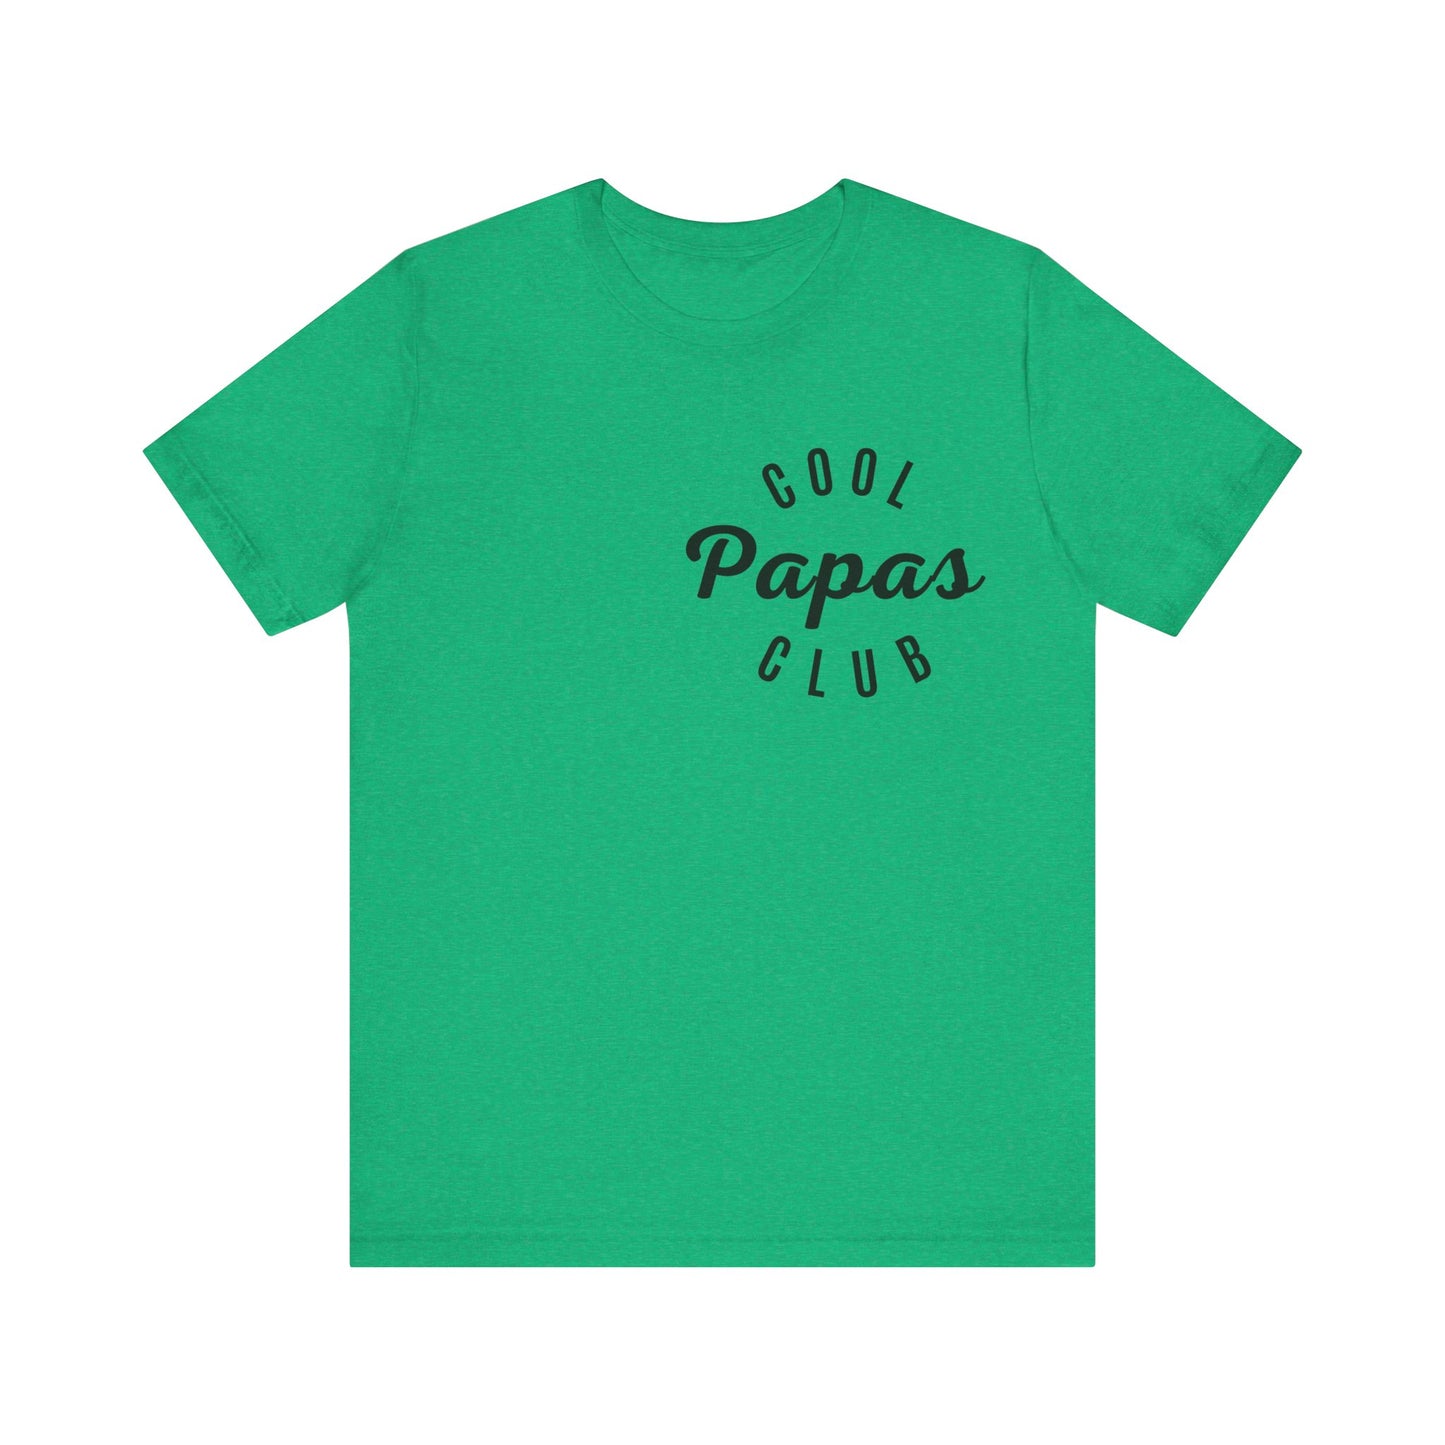 Cool Papas Club Shirt, Pregnancy Announcement TShirt for Dad , Cool Dad T-Shirt for New Dad, Funny Gift for Dad to Be, T1064